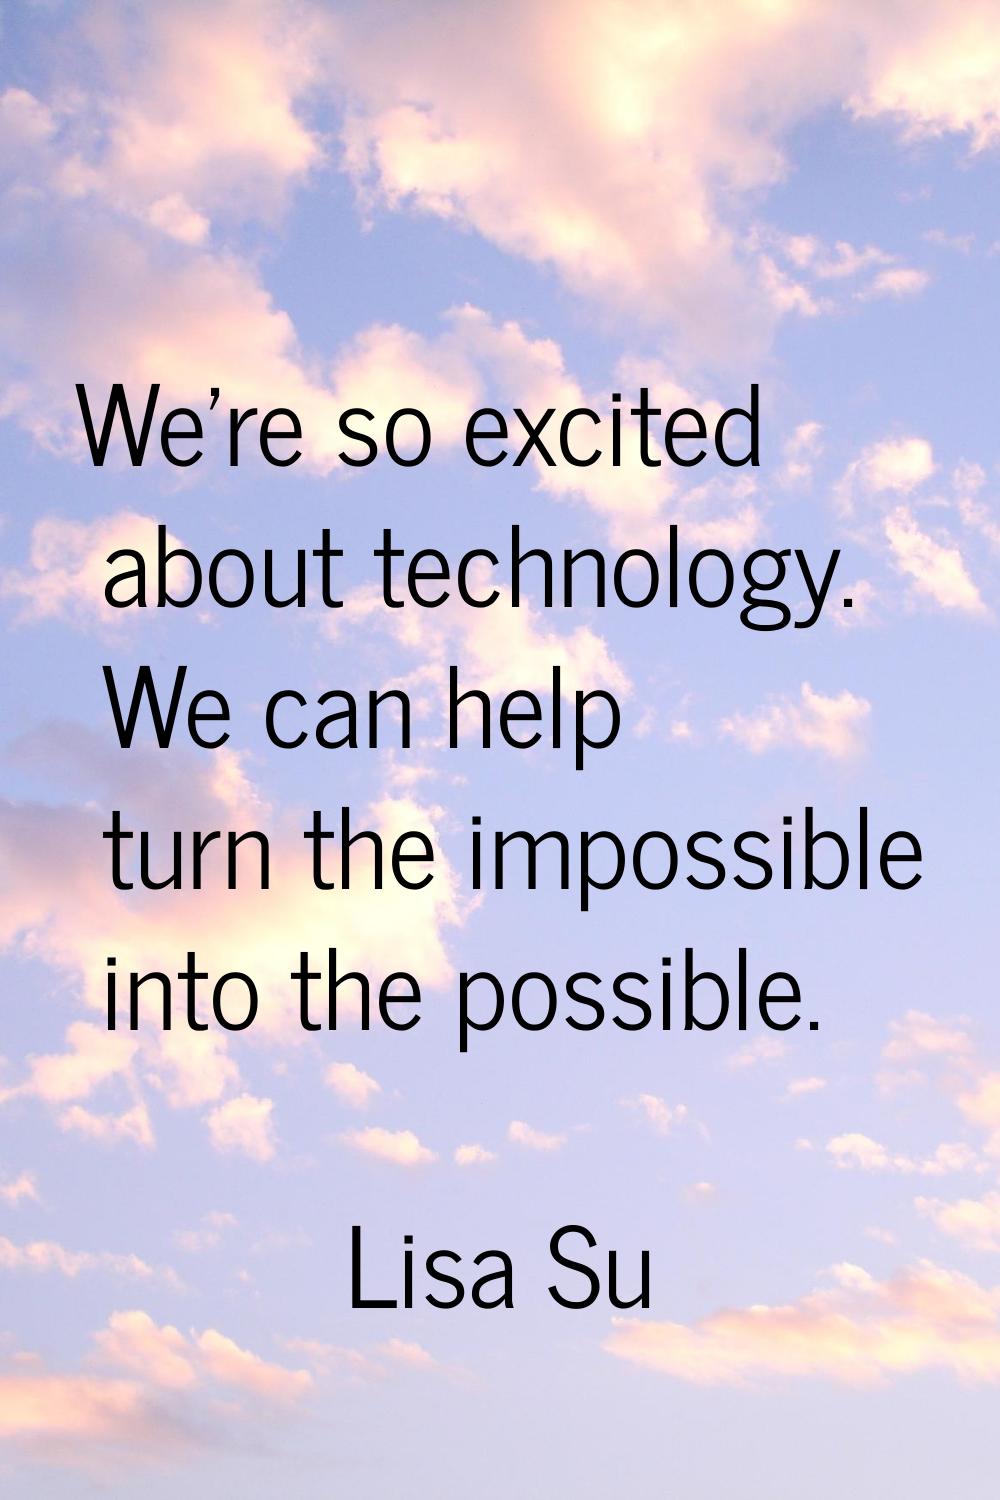 We're so excited about technology. We can help turn the impossible into the possible.